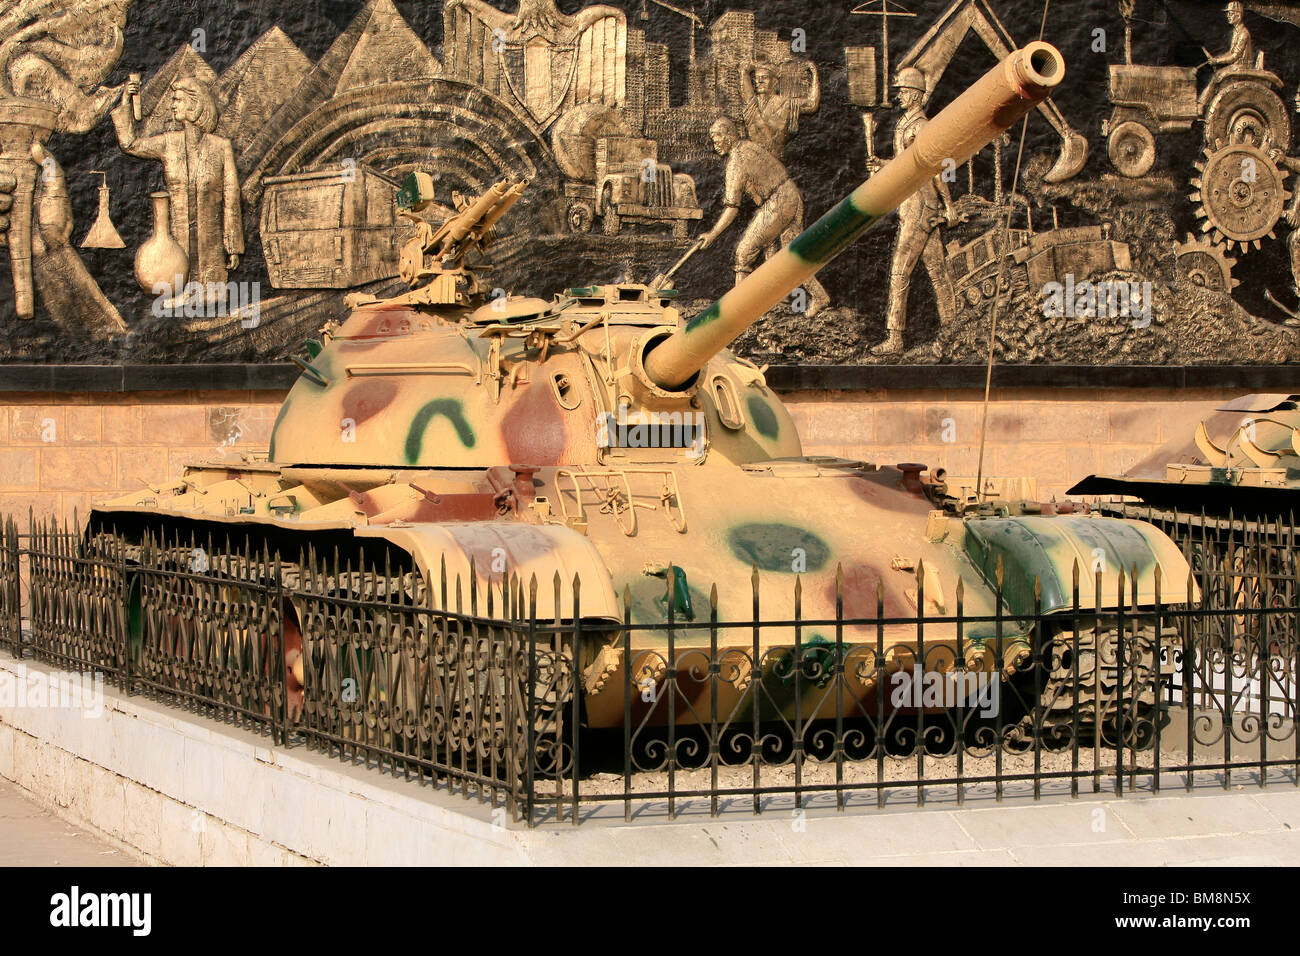 Soviet T-54 battle tank of the Egyptian army at the Military Museum in Cairo, Egypt Stock Photo